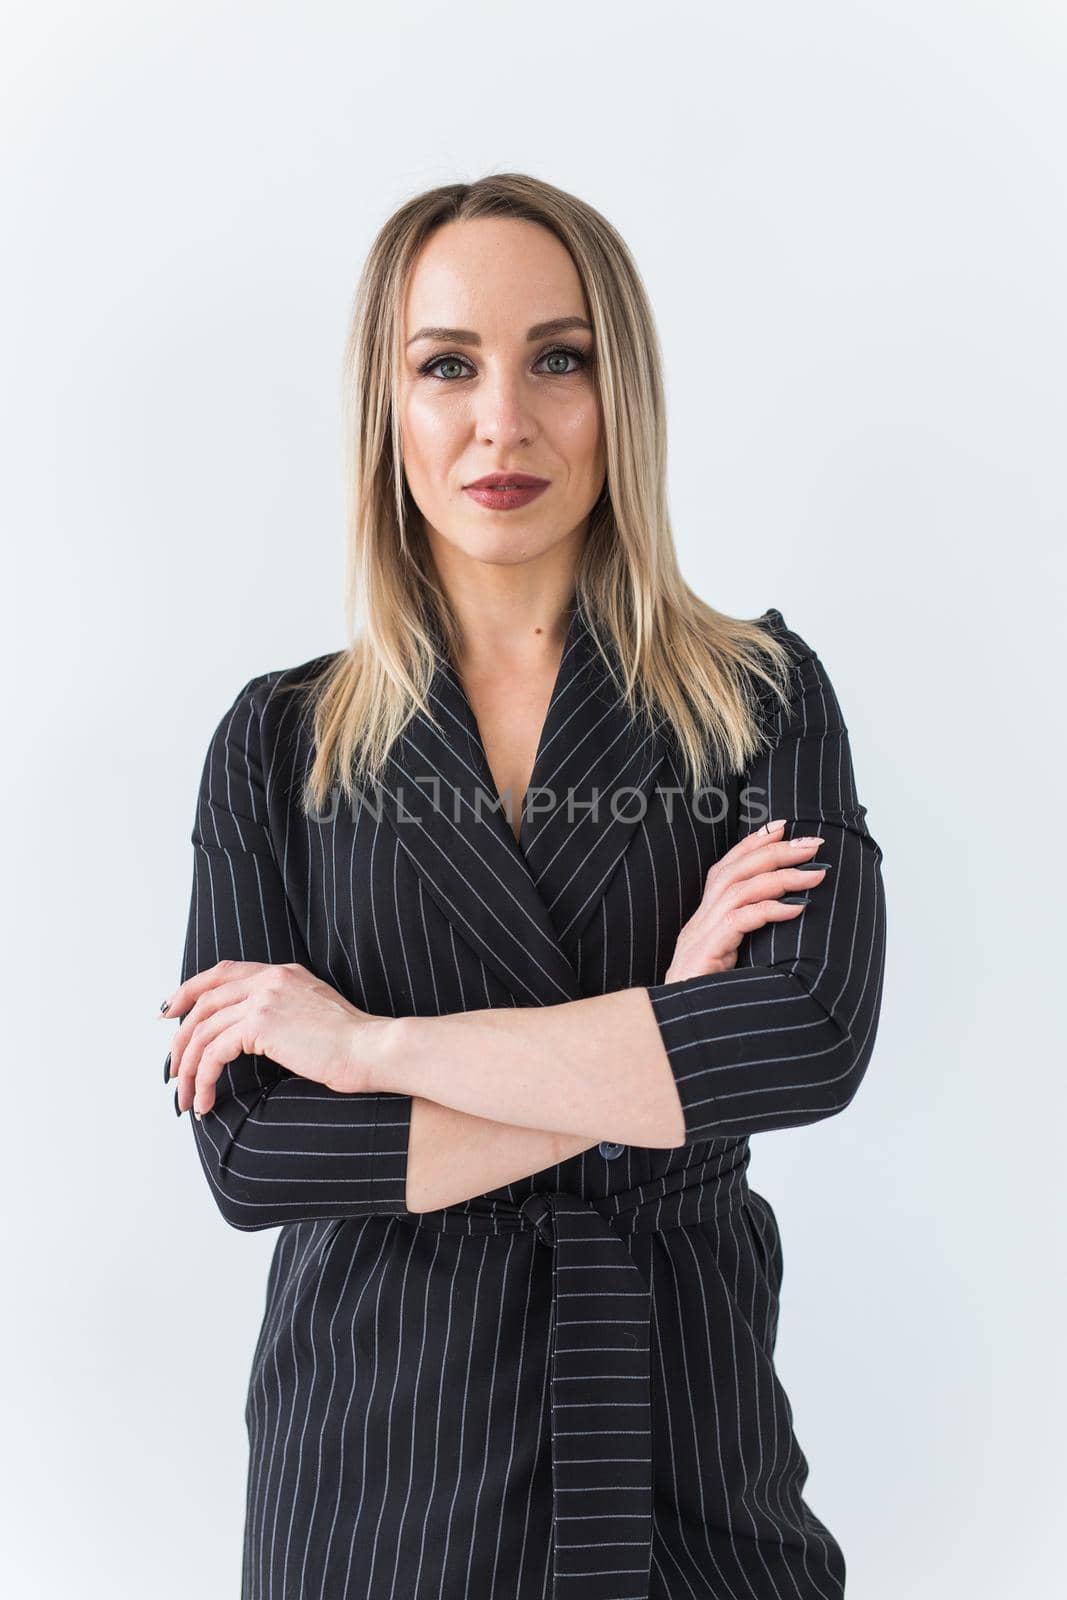 Fashion concept - Portrait of sexy business woman in a suit on white background. by Satura86